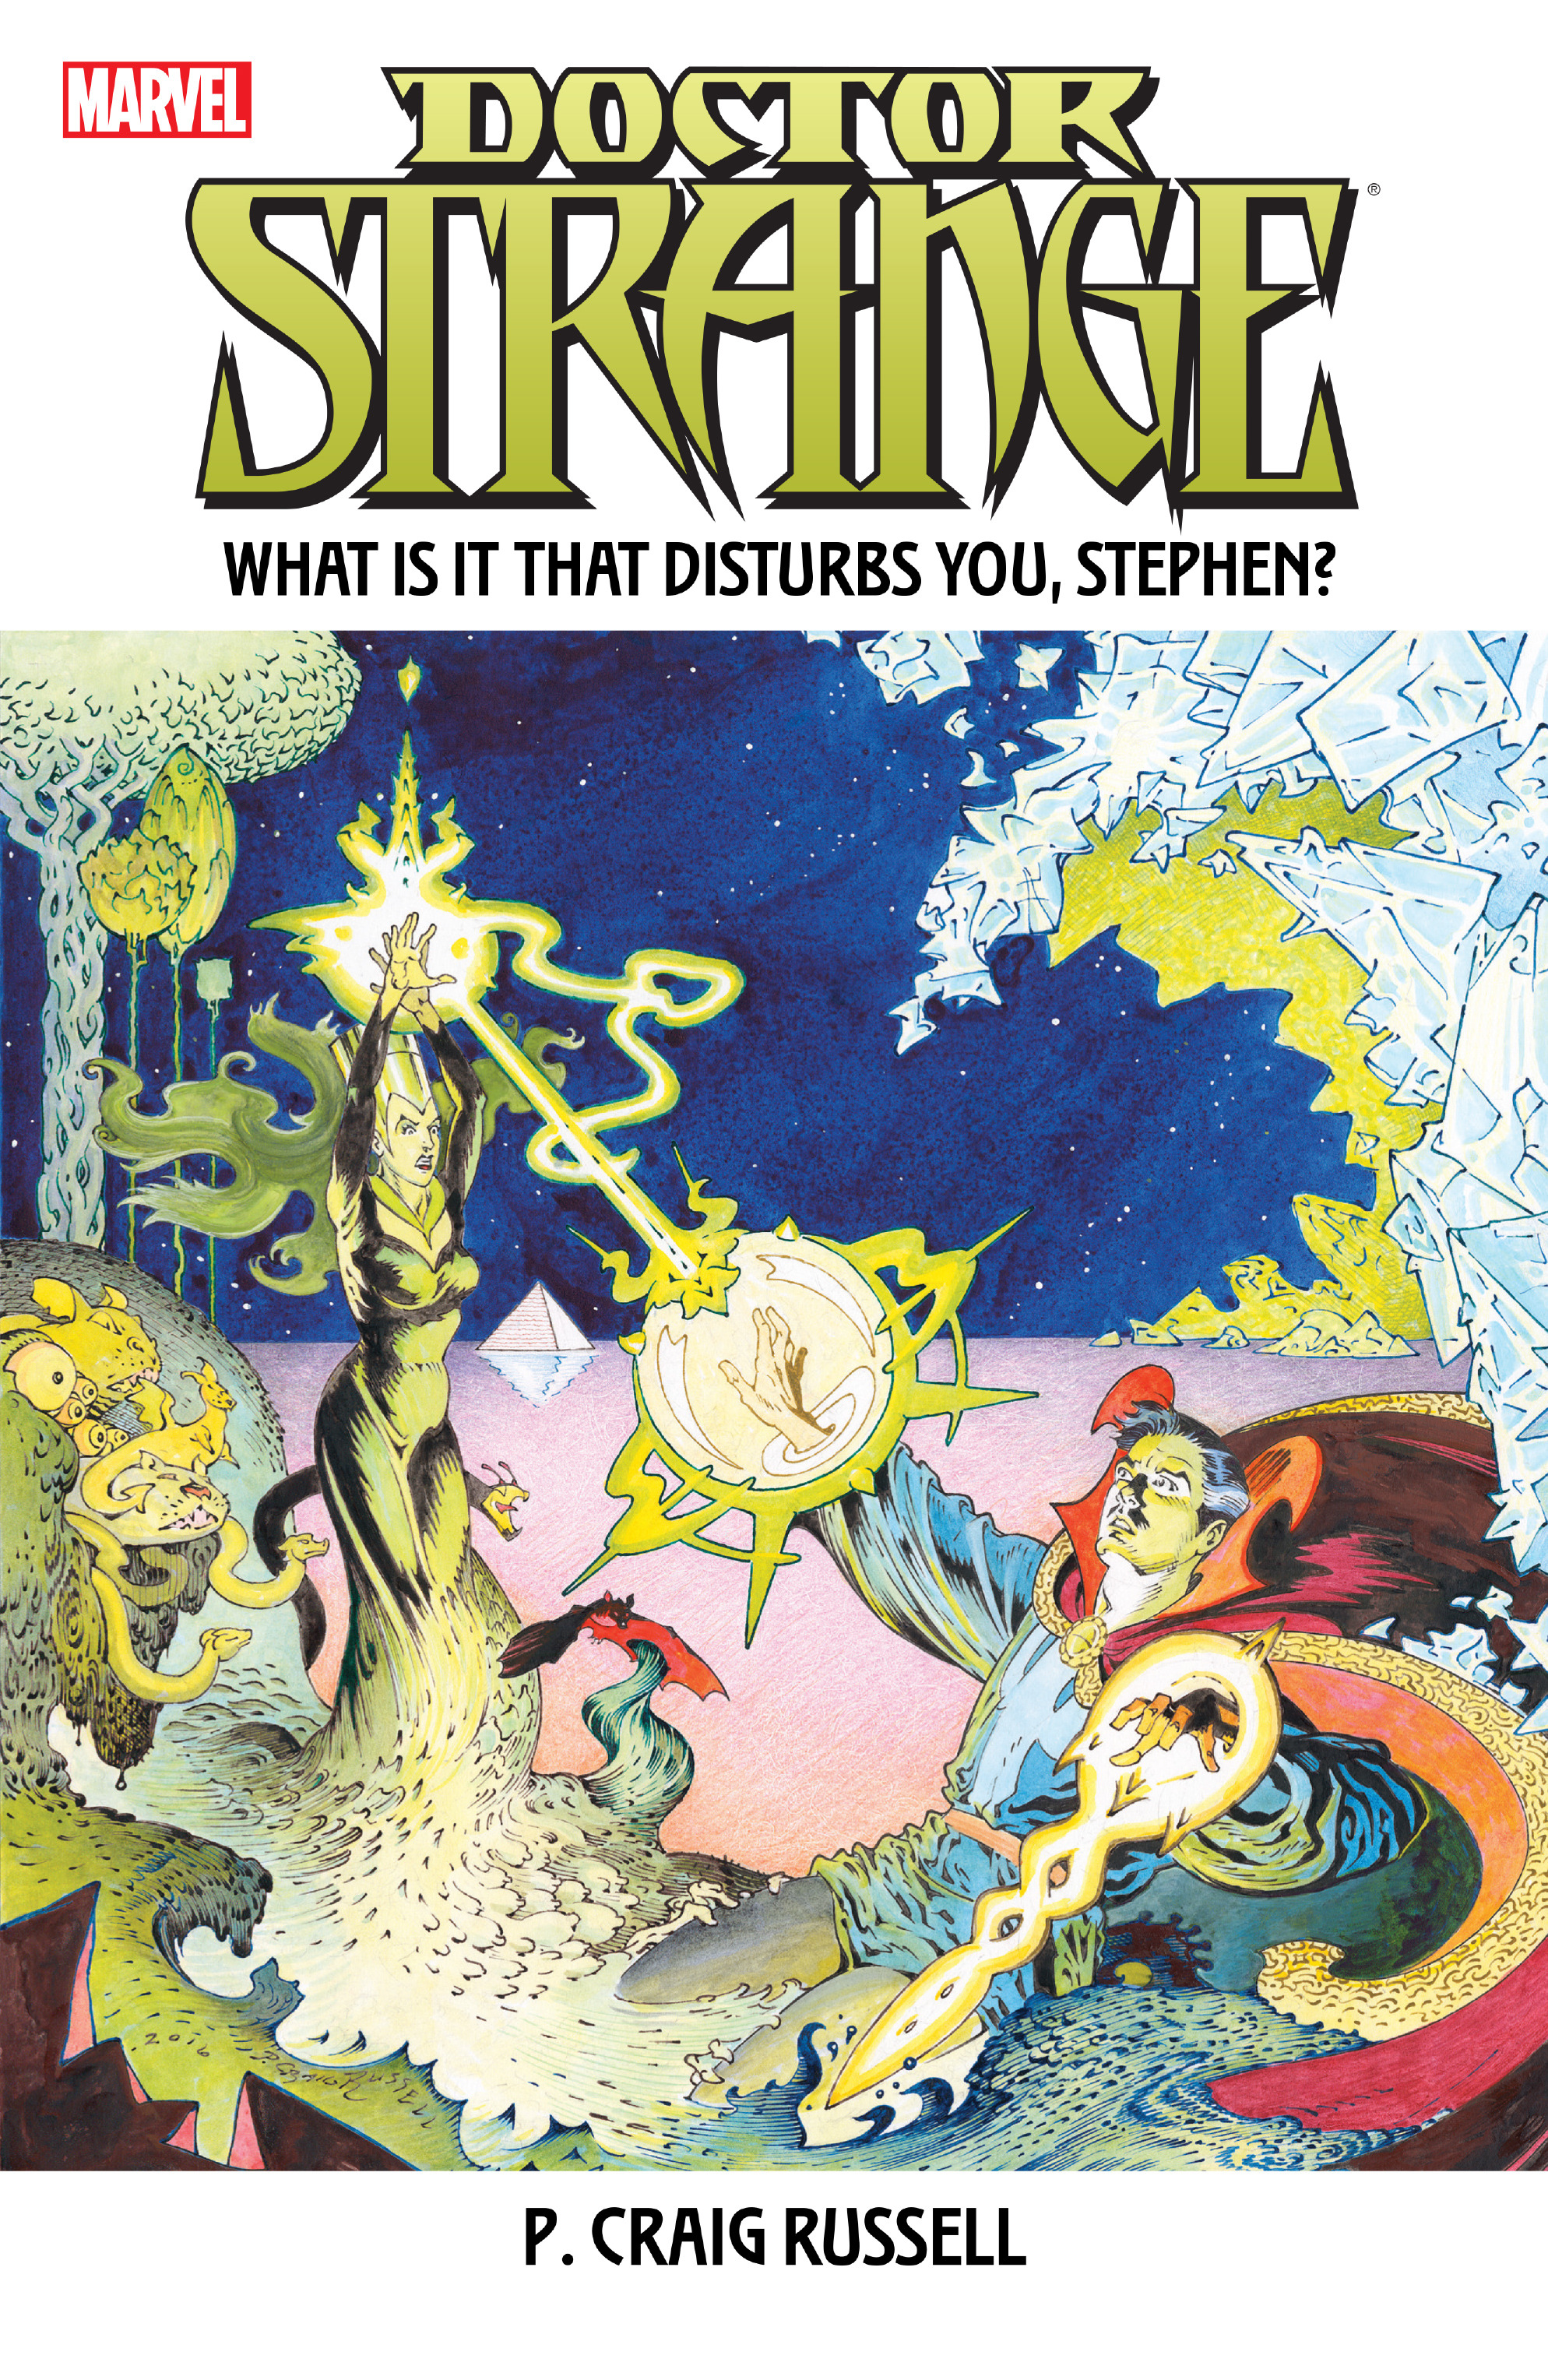 Read online Doctor Strange: What Is It That Disturbs You, Stephen? comic -  Issue # TPB - 1